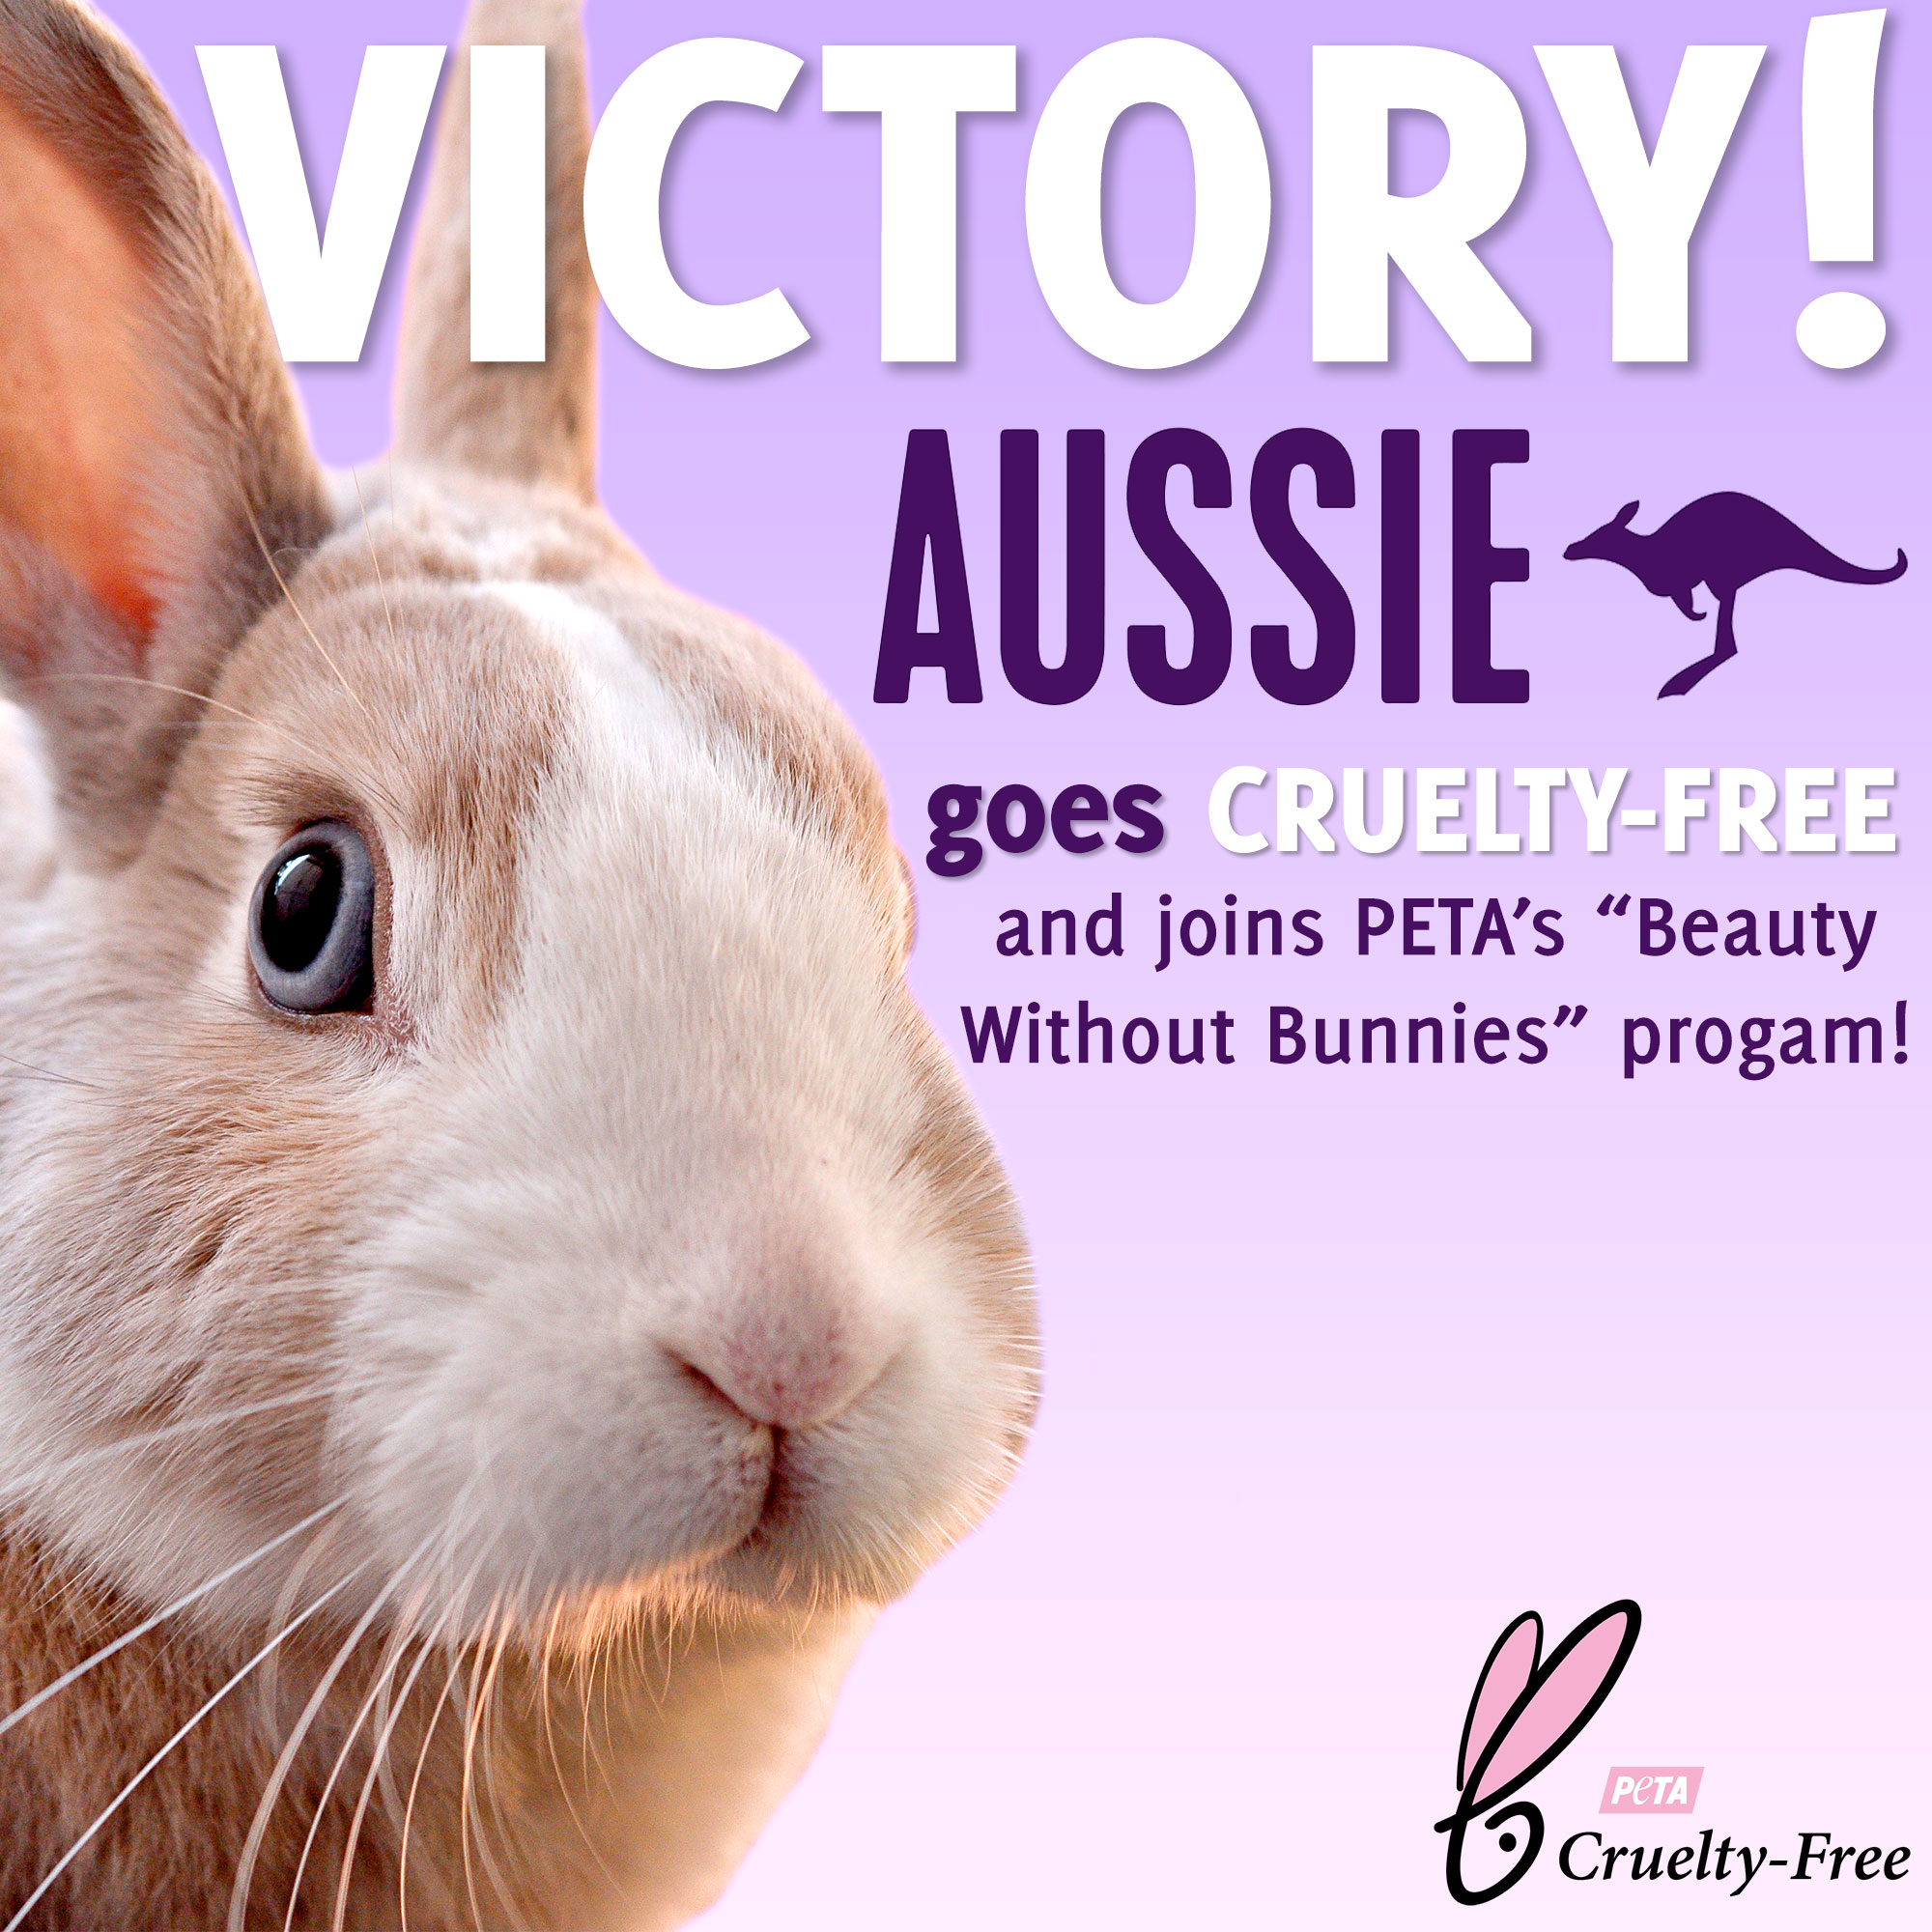 Hair-Care Brand Aussie Bans Animal Tests and Goes Cruelty-Free! |  Cruelty-Free Products - PETA Asia